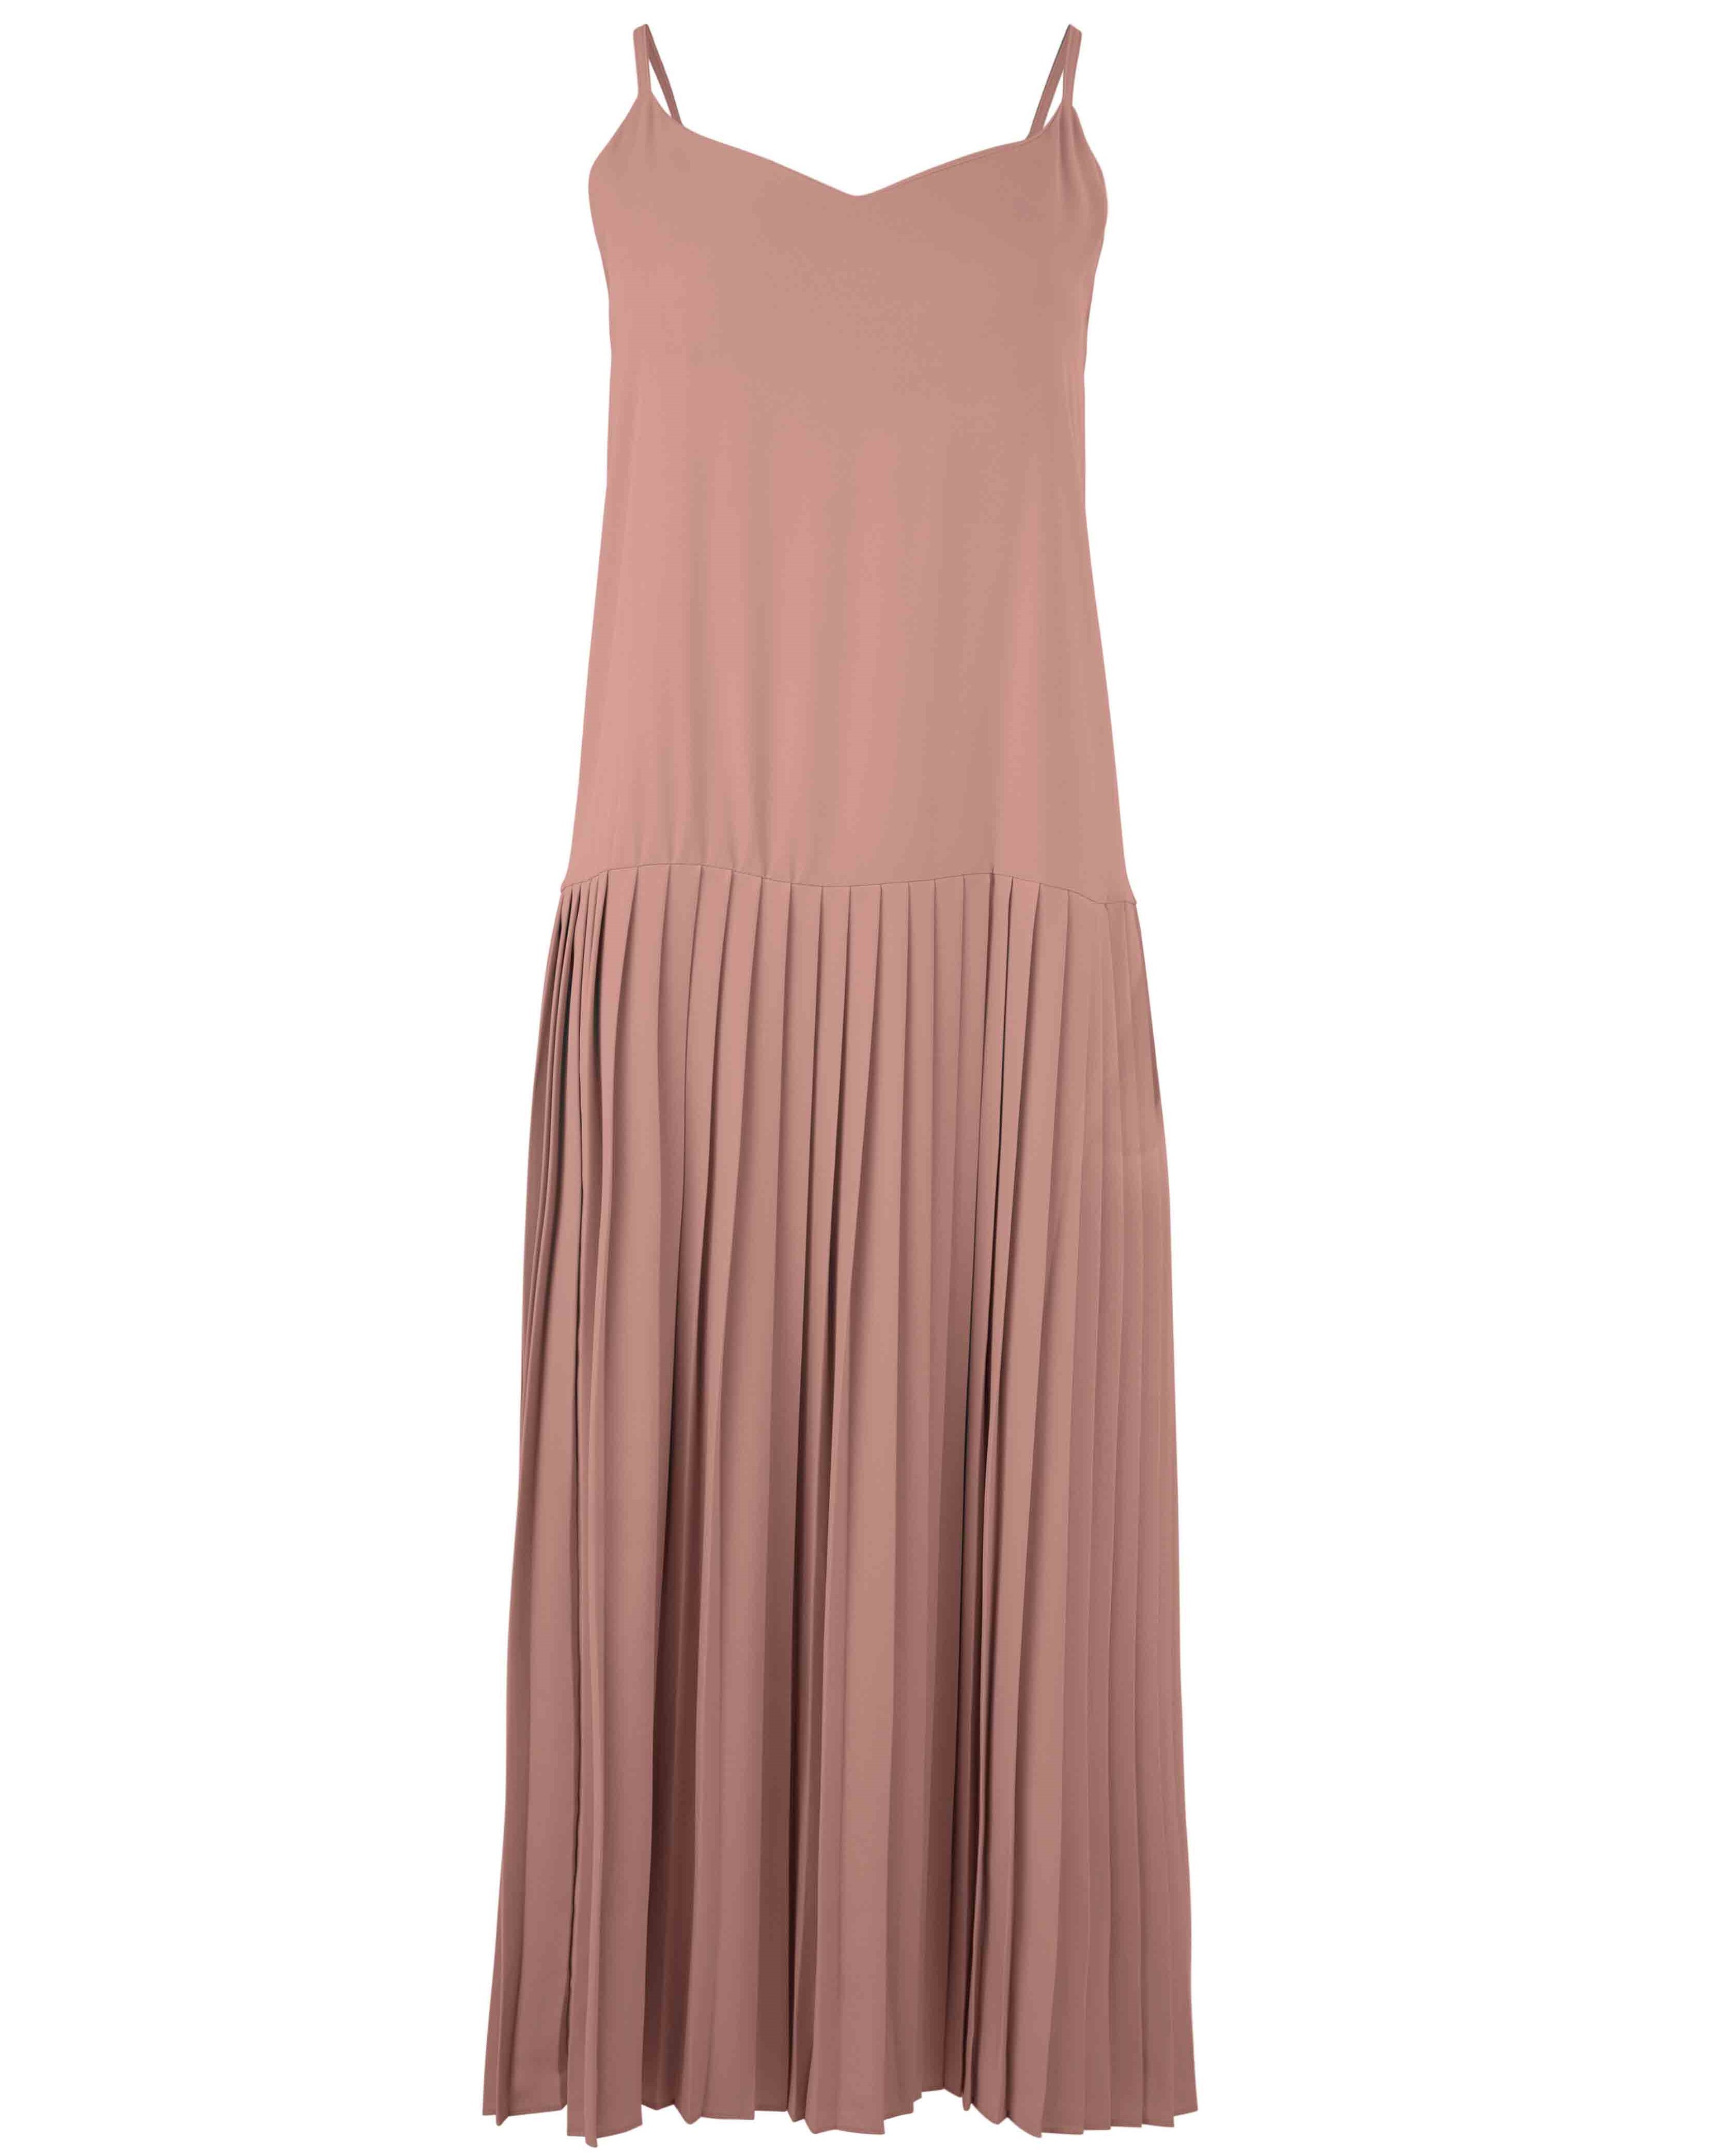 PLEATED LITTLE LIES DRESS (DUSKY ROSE)- TRELISE COOPER W20 Boxing Day Sale